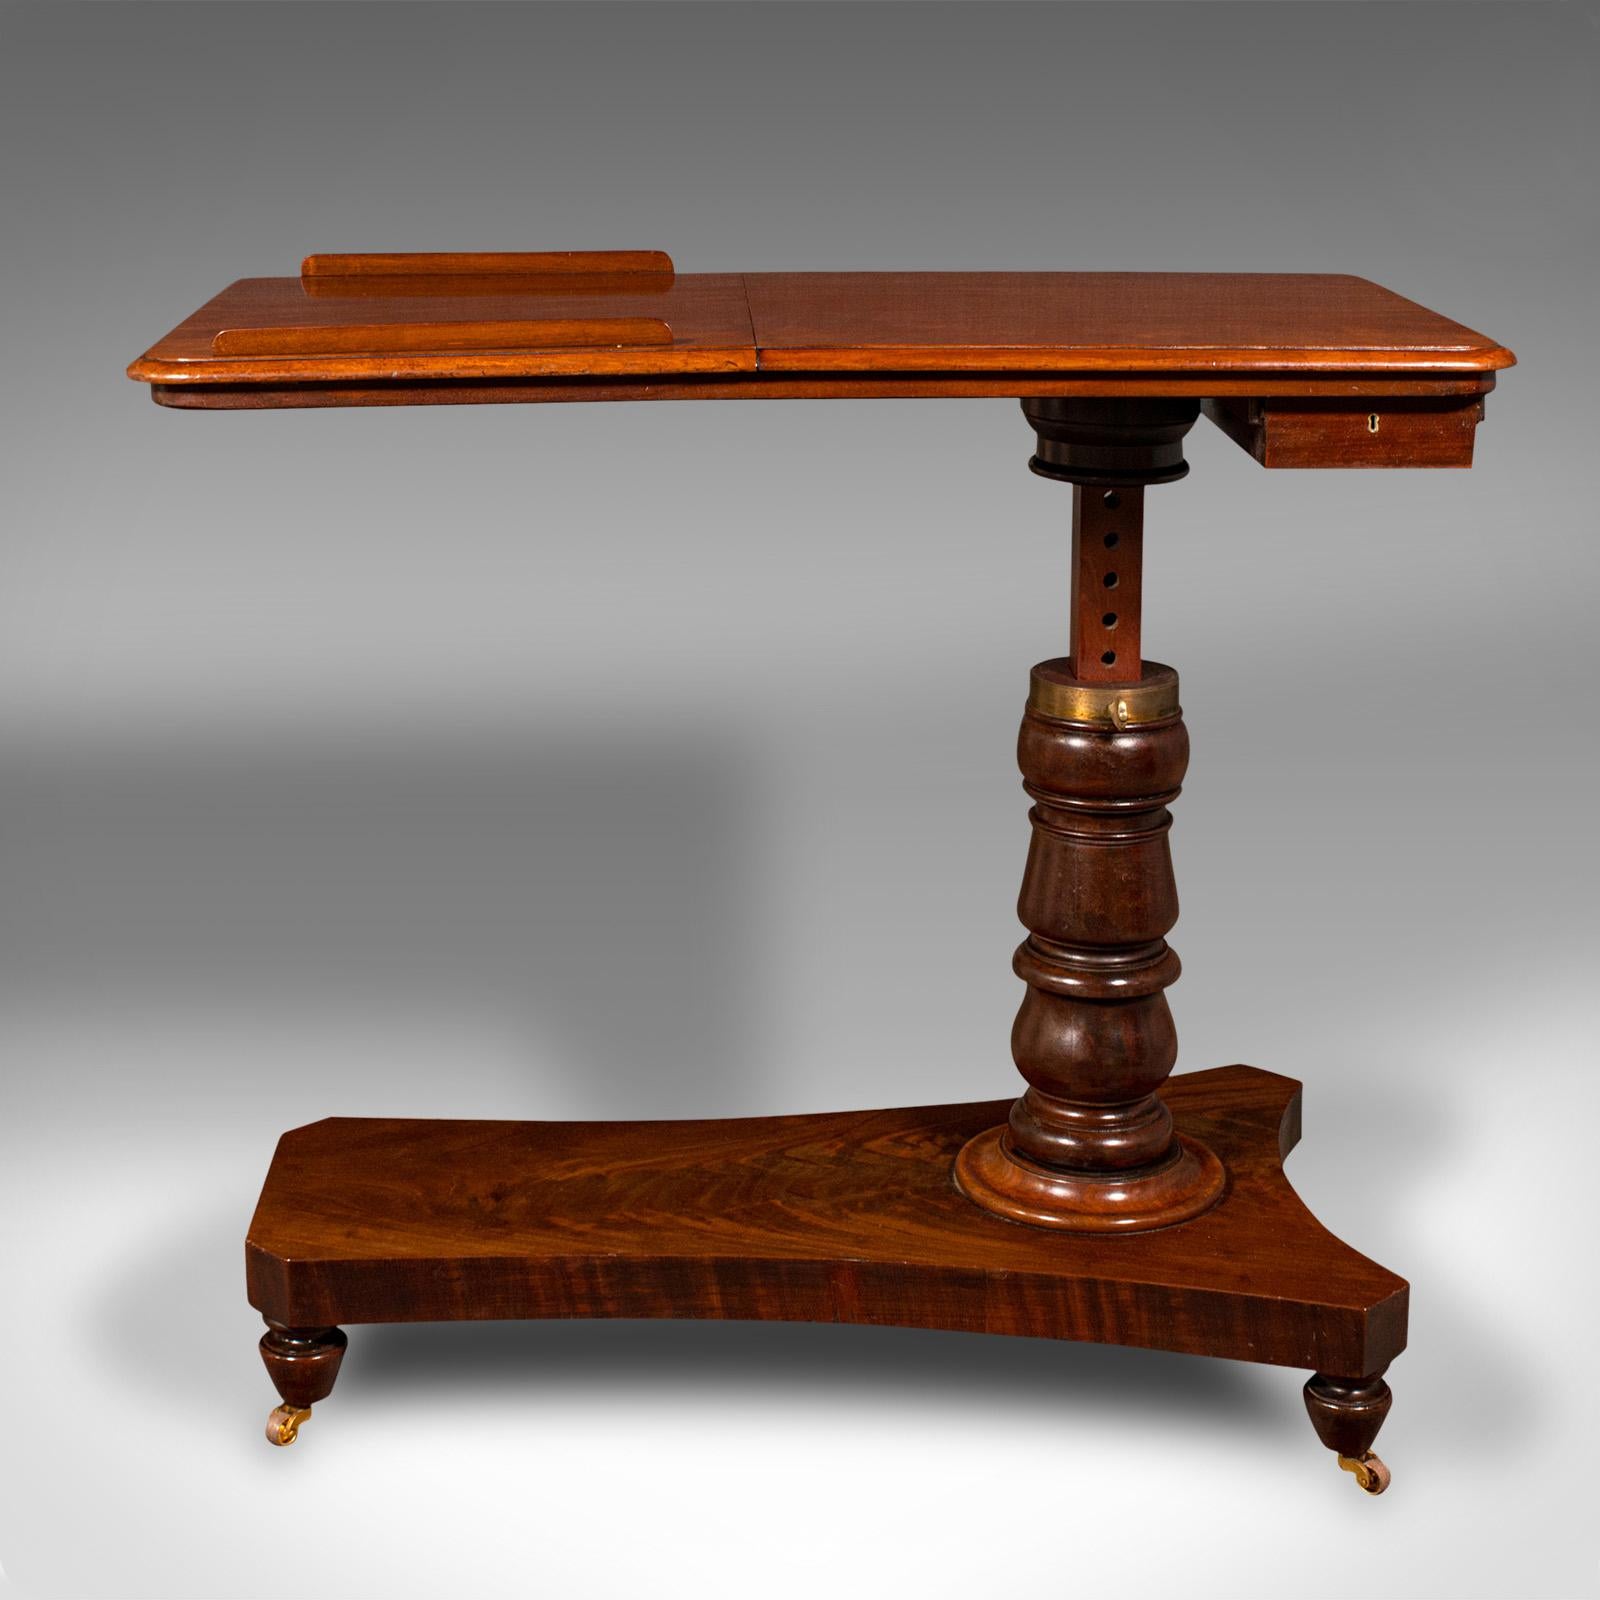 Late Victorian Antique Gentleman's Reading Table, English, Adjustable, Writing Desk, Victorian